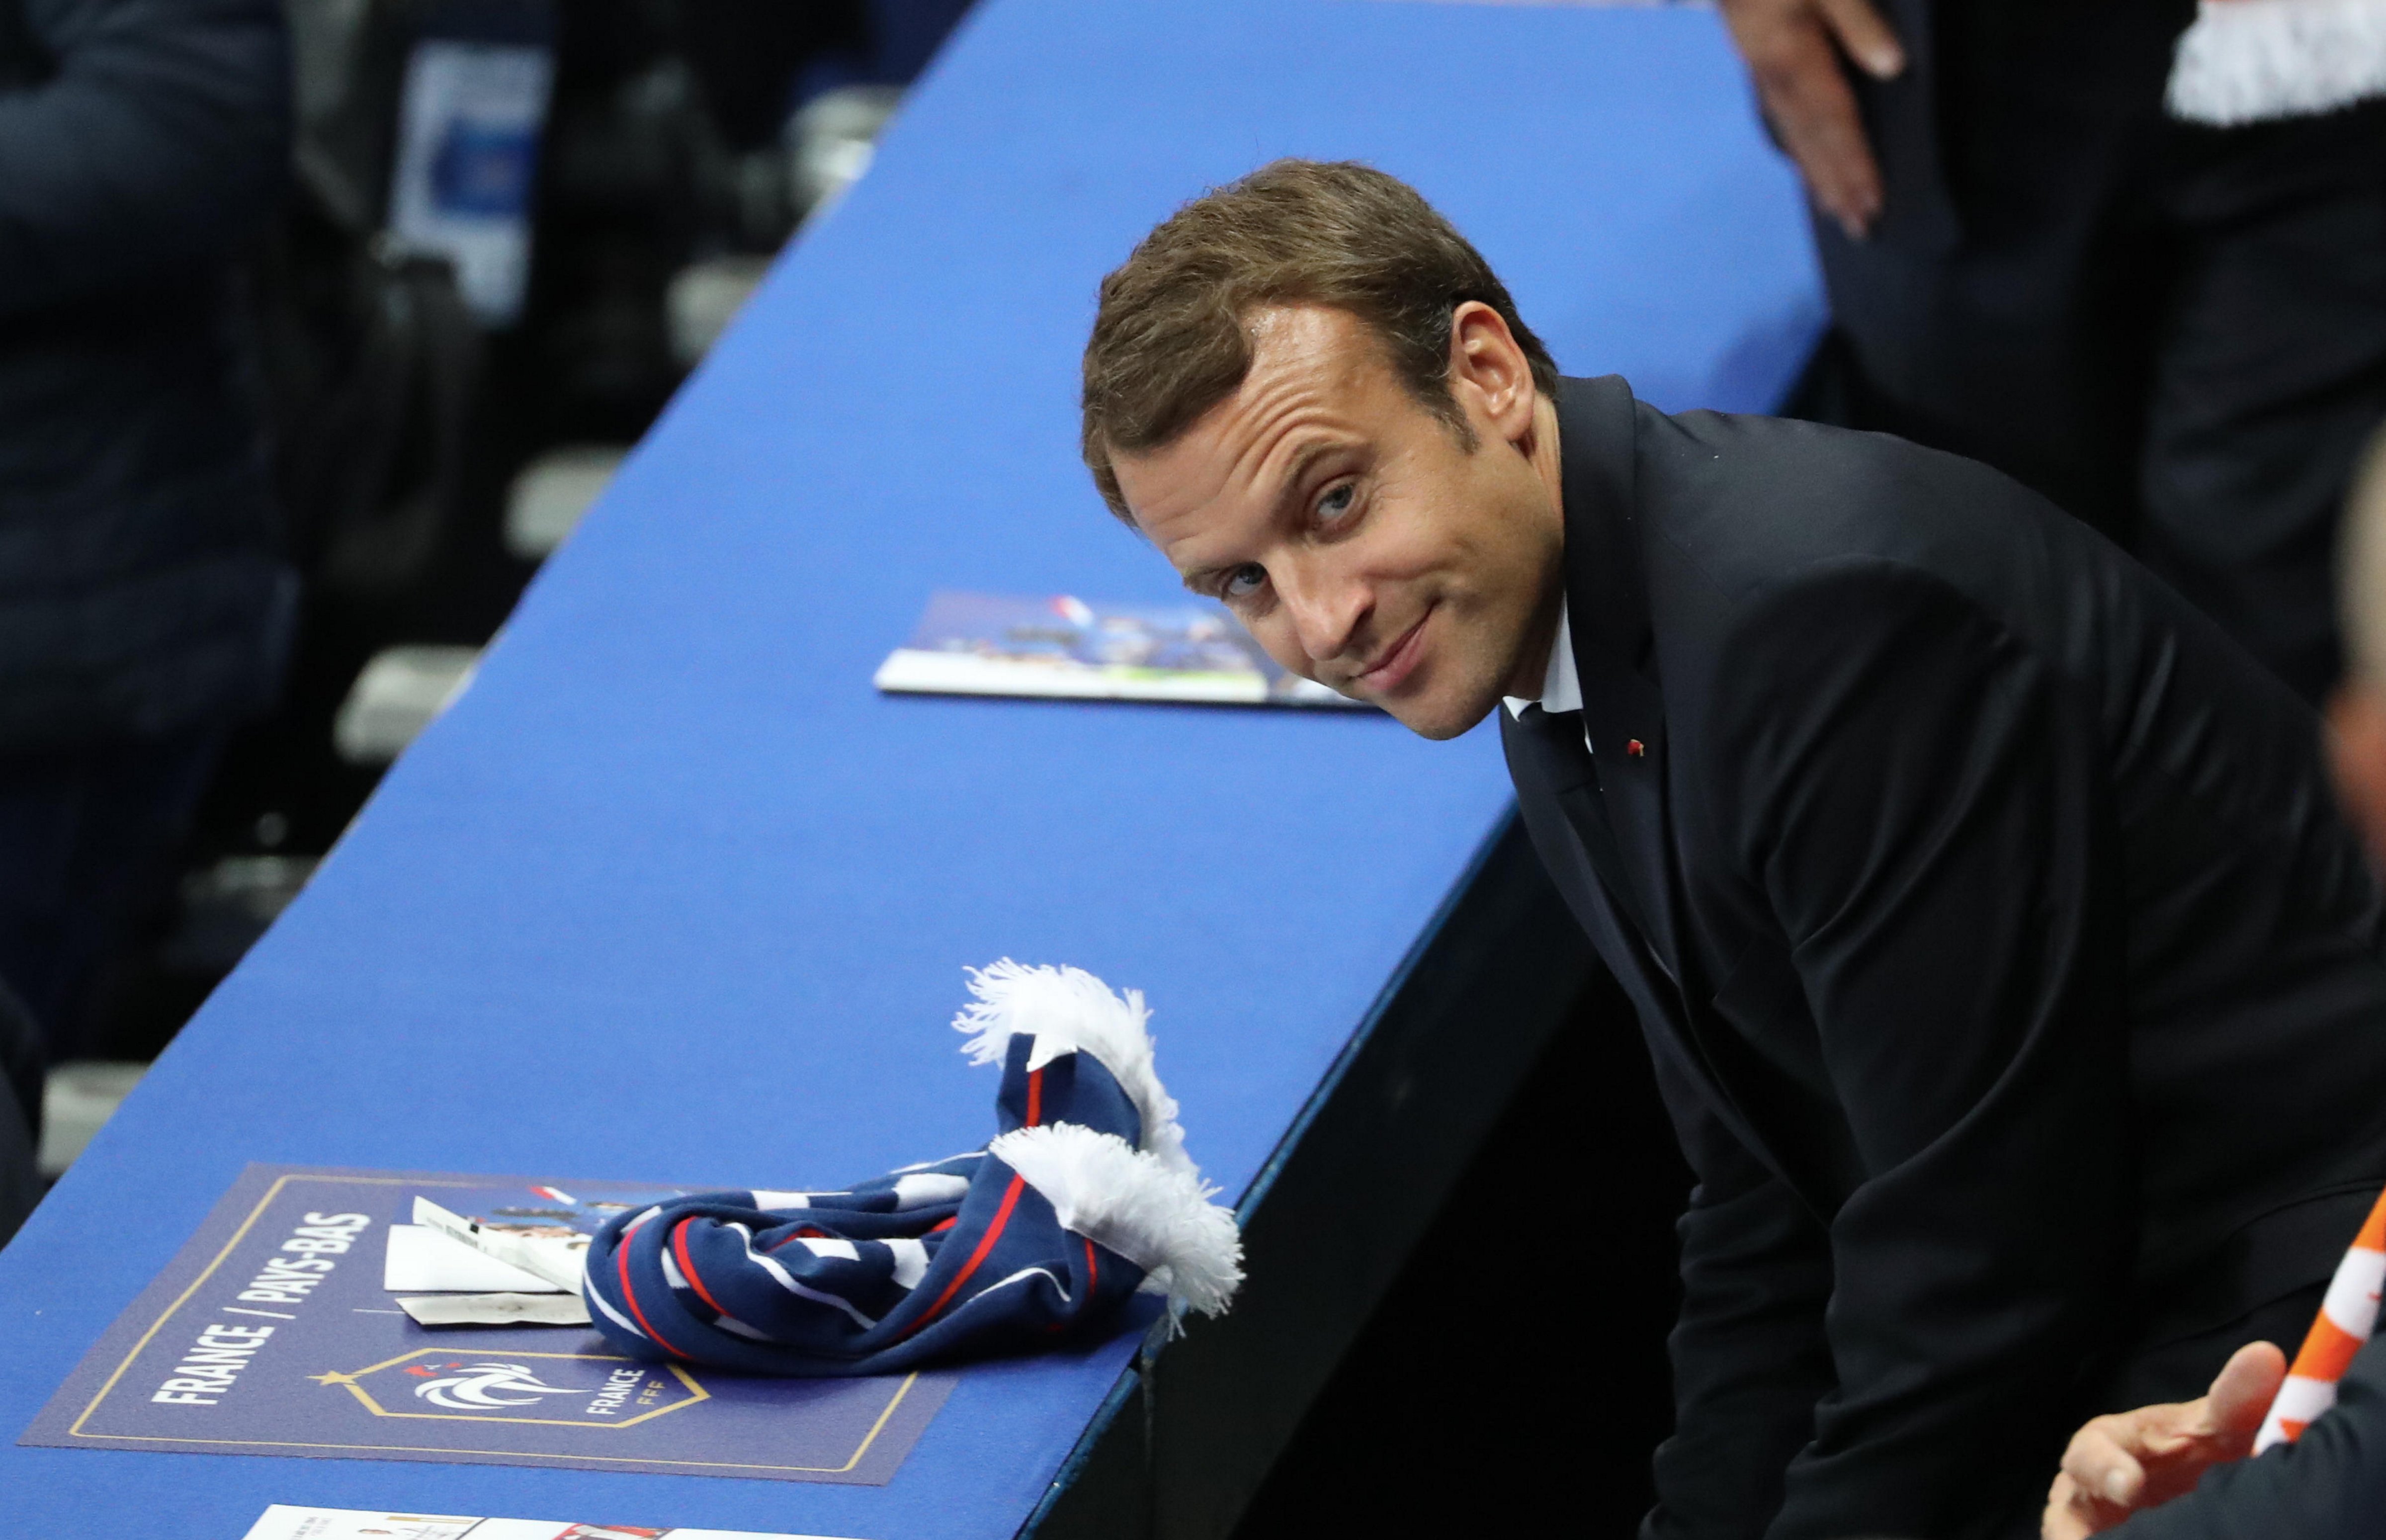 French president Emmanuel Macron reacts during the FIFA 2018 World Cup Qualifier between France and Netherlands. (Xavier Laine - Getty Images)